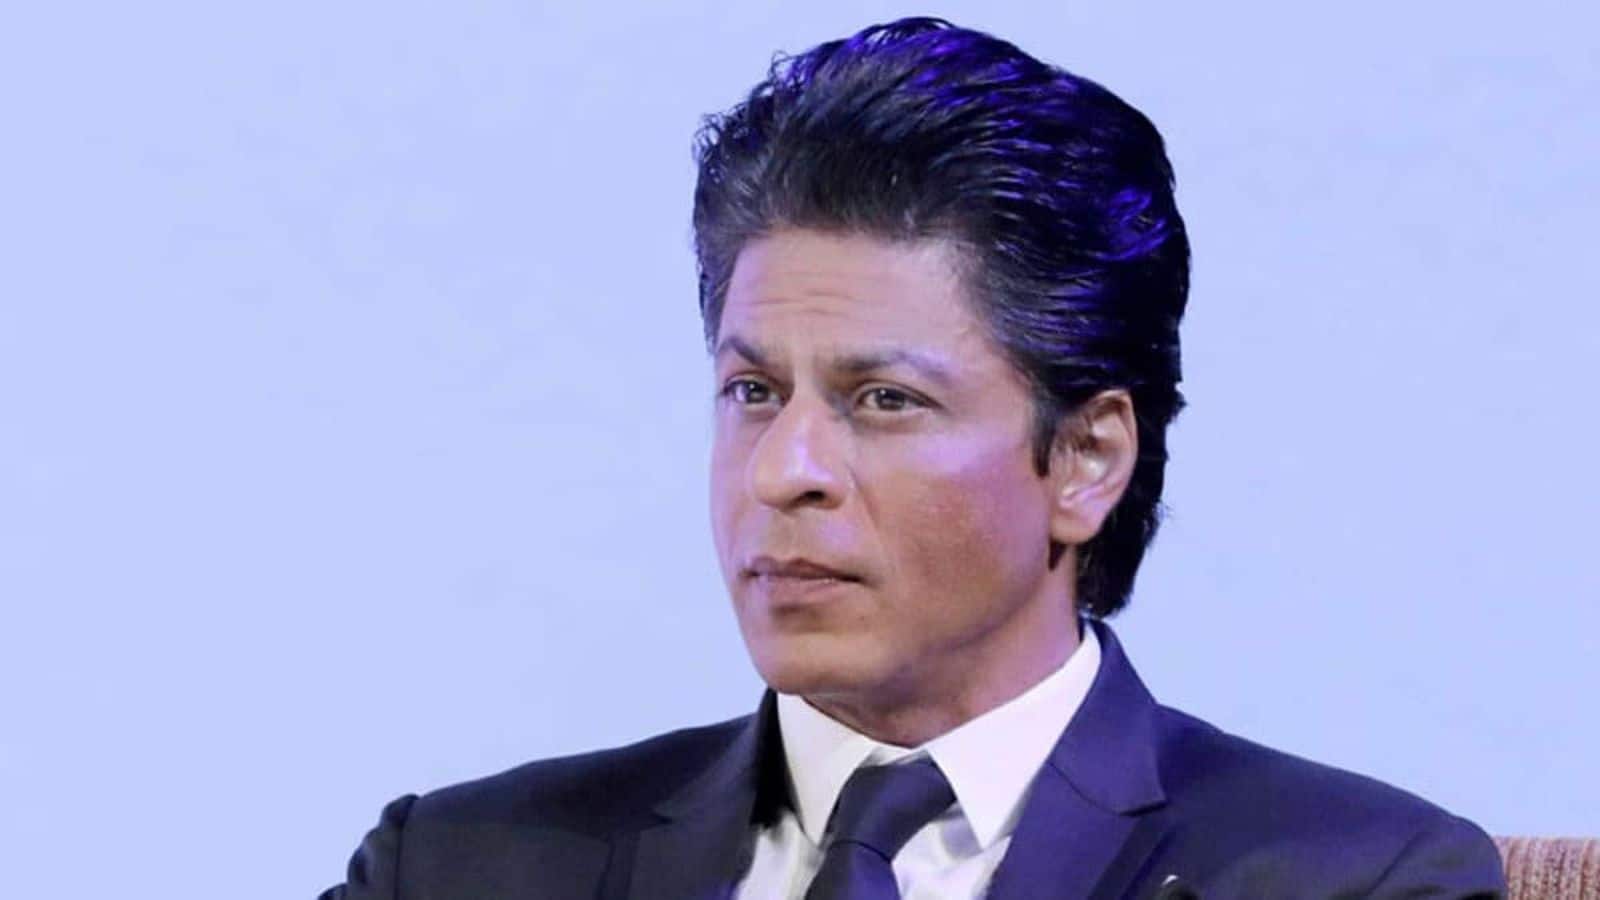 Shah Rukh Khan hospitalized due to dehydration; later discharged